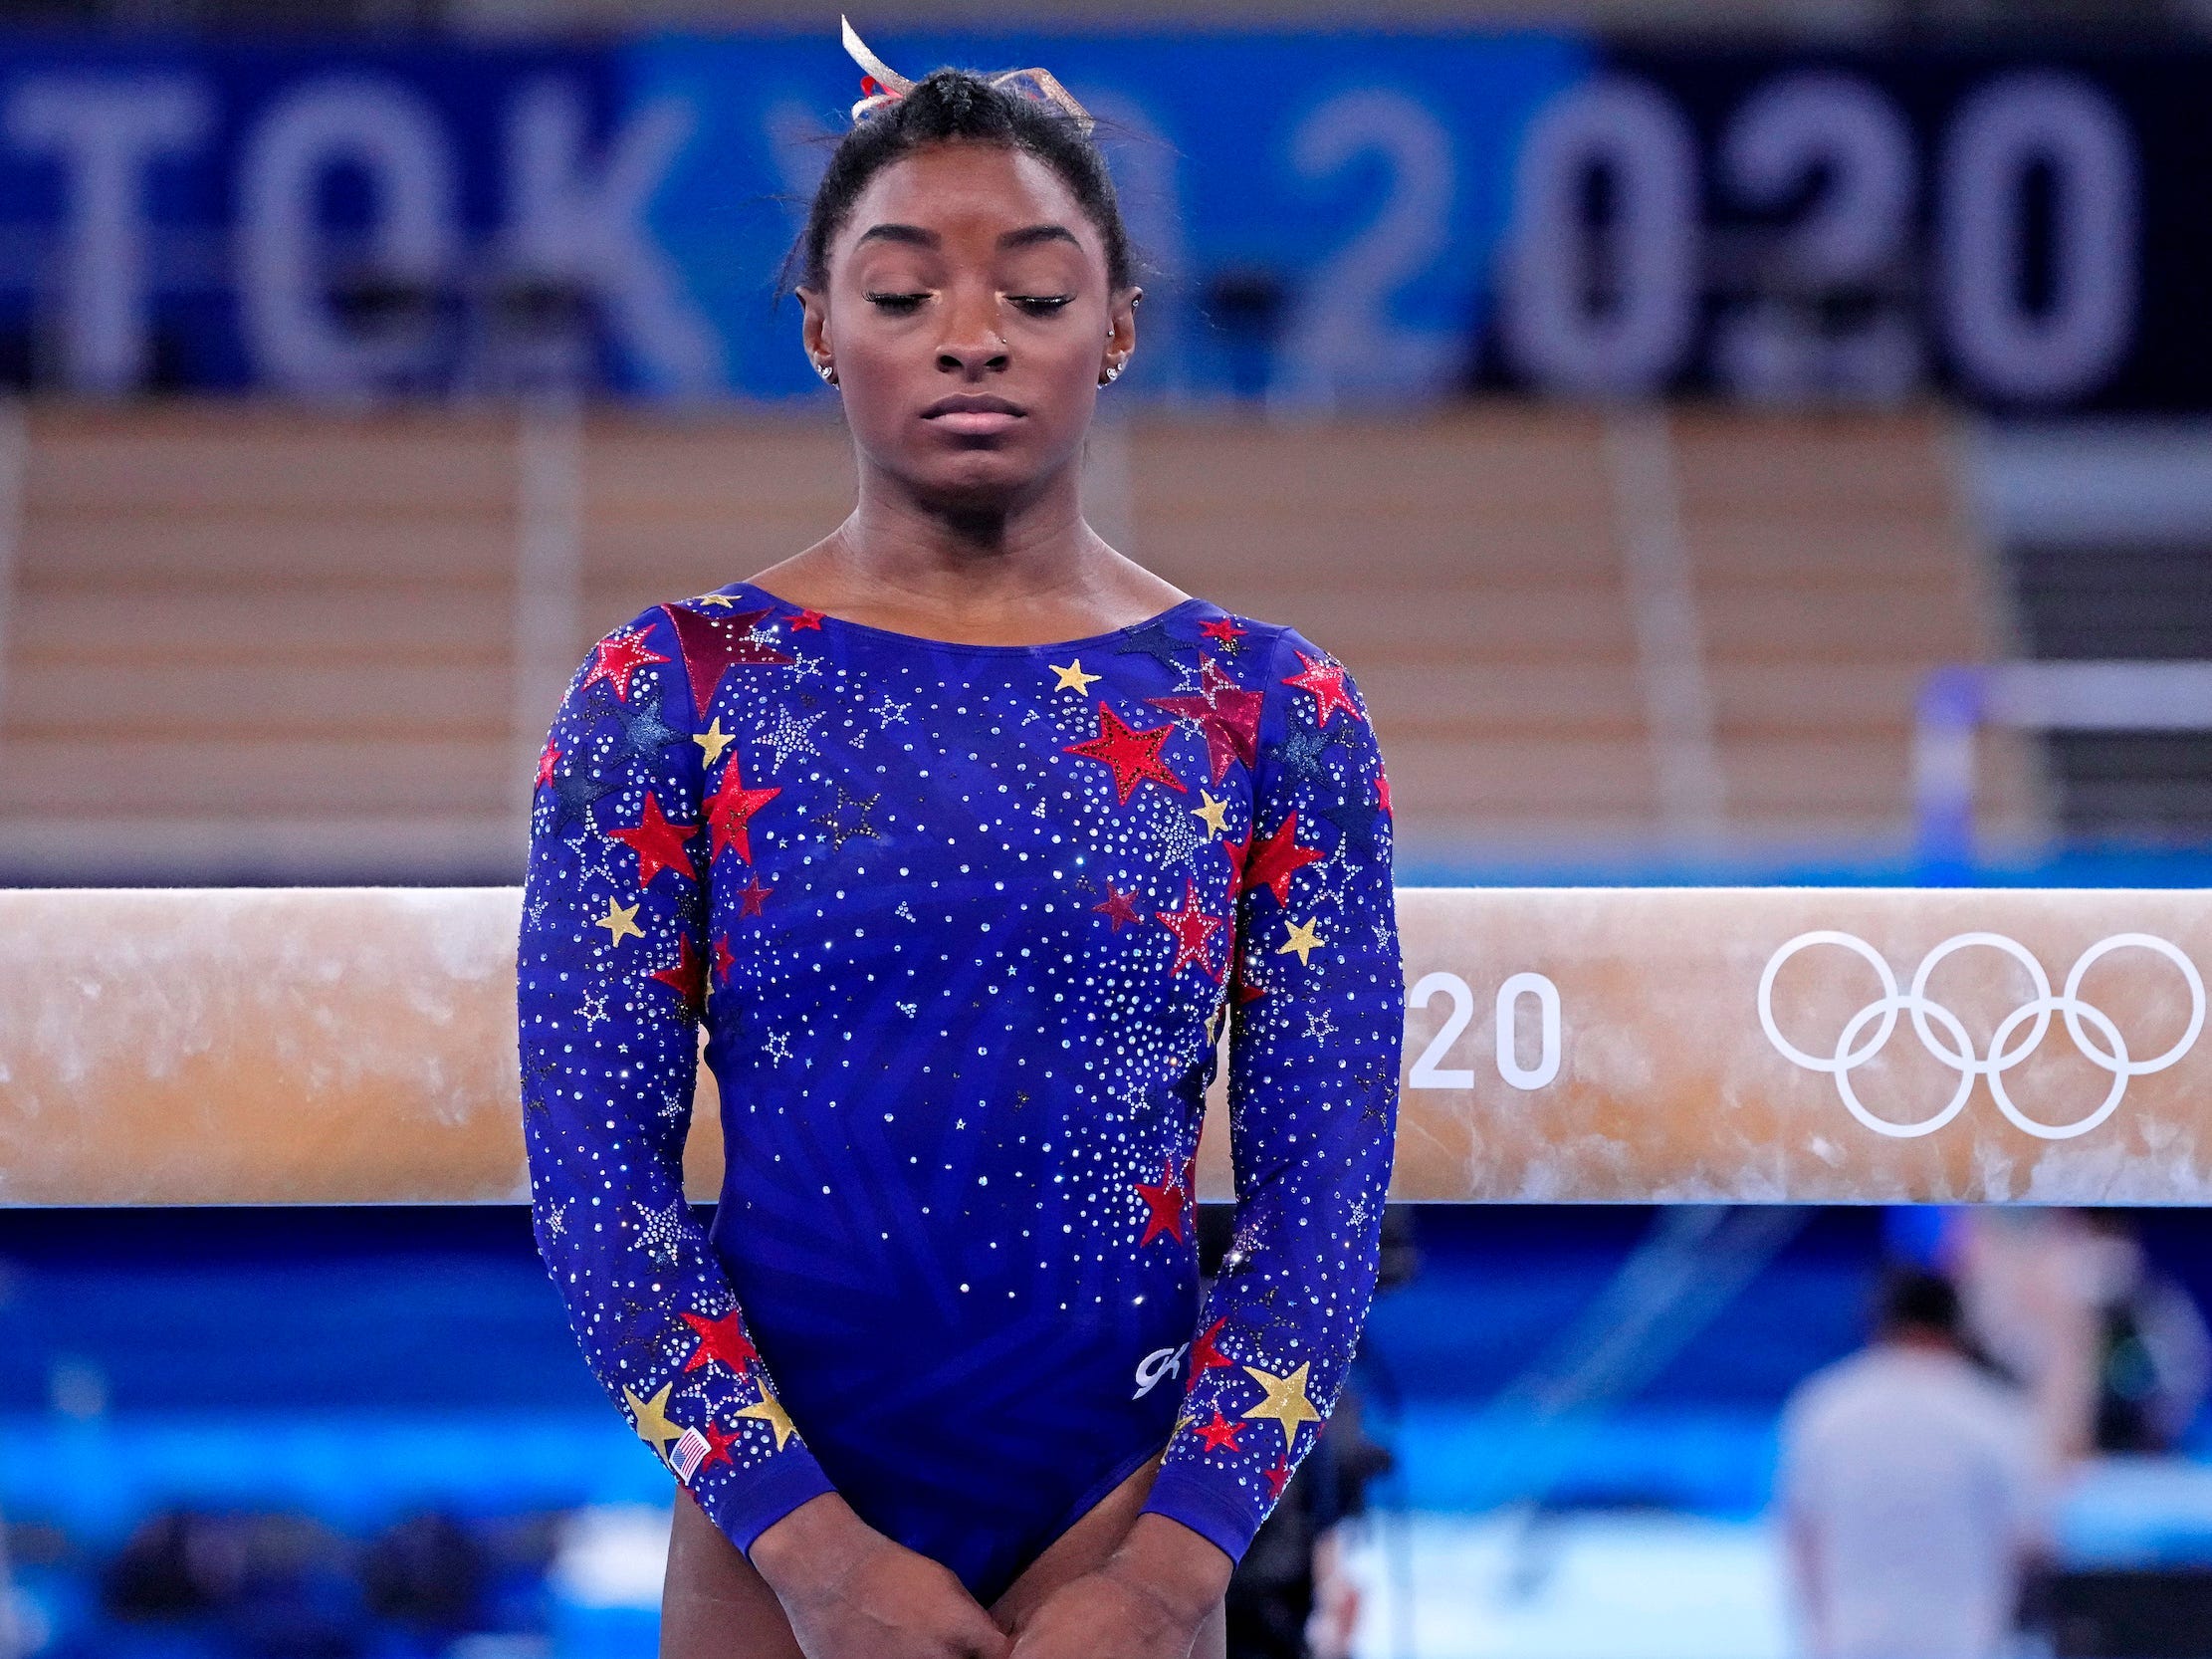 Simone Biles competes on the balance beam during the Tokyo Olympics.